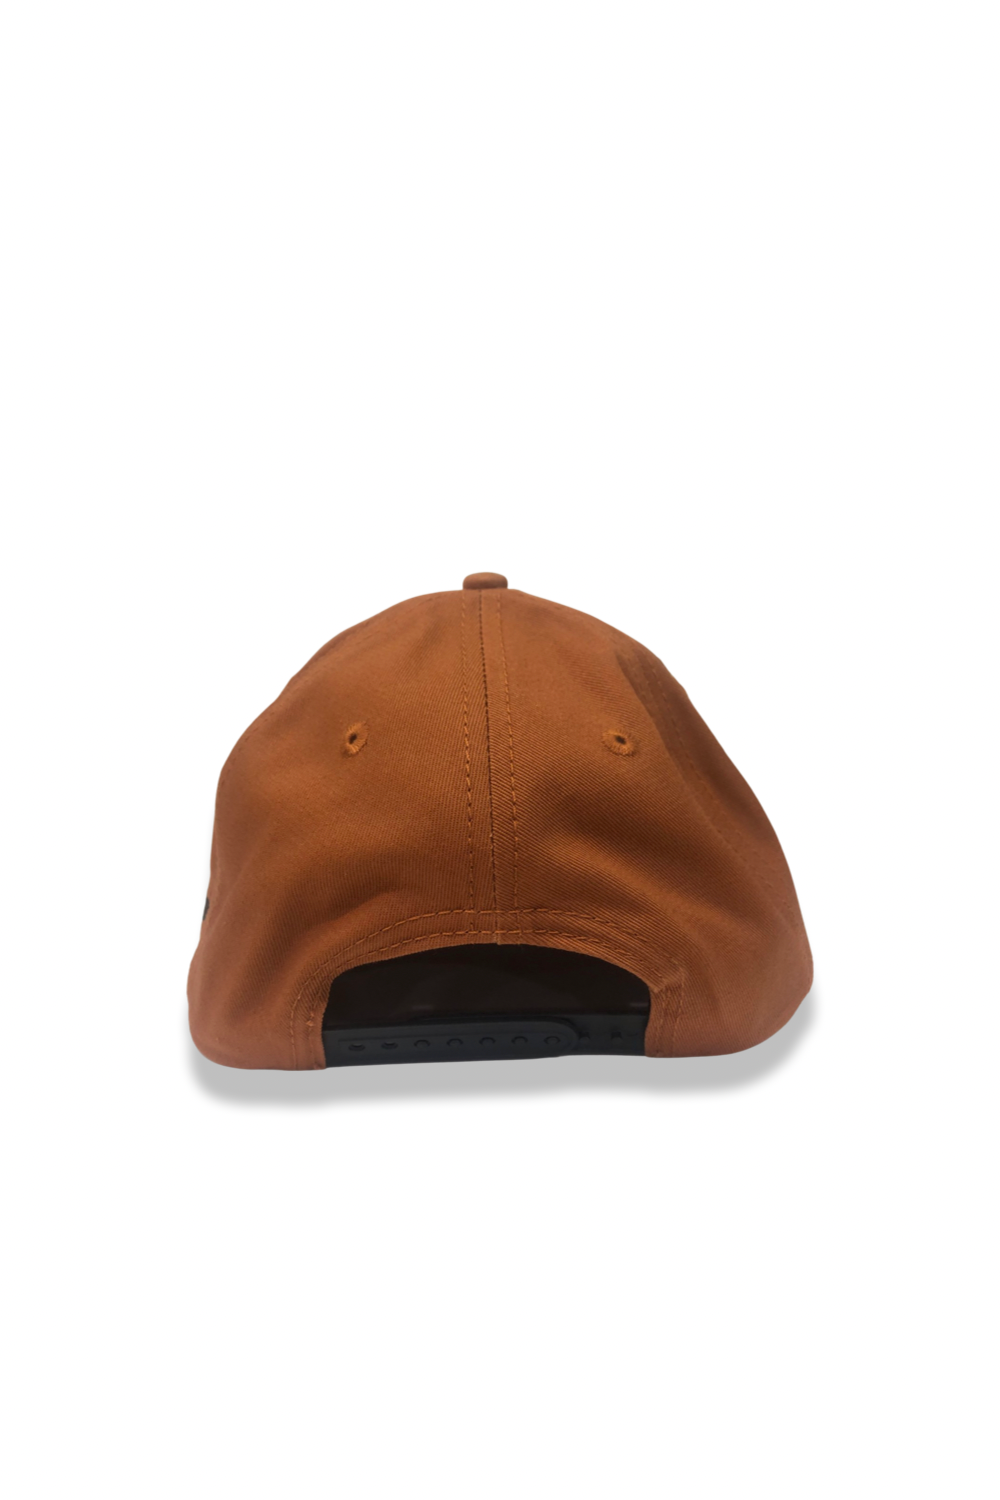 NS Aframe Tobacco Youth Fit Snapback